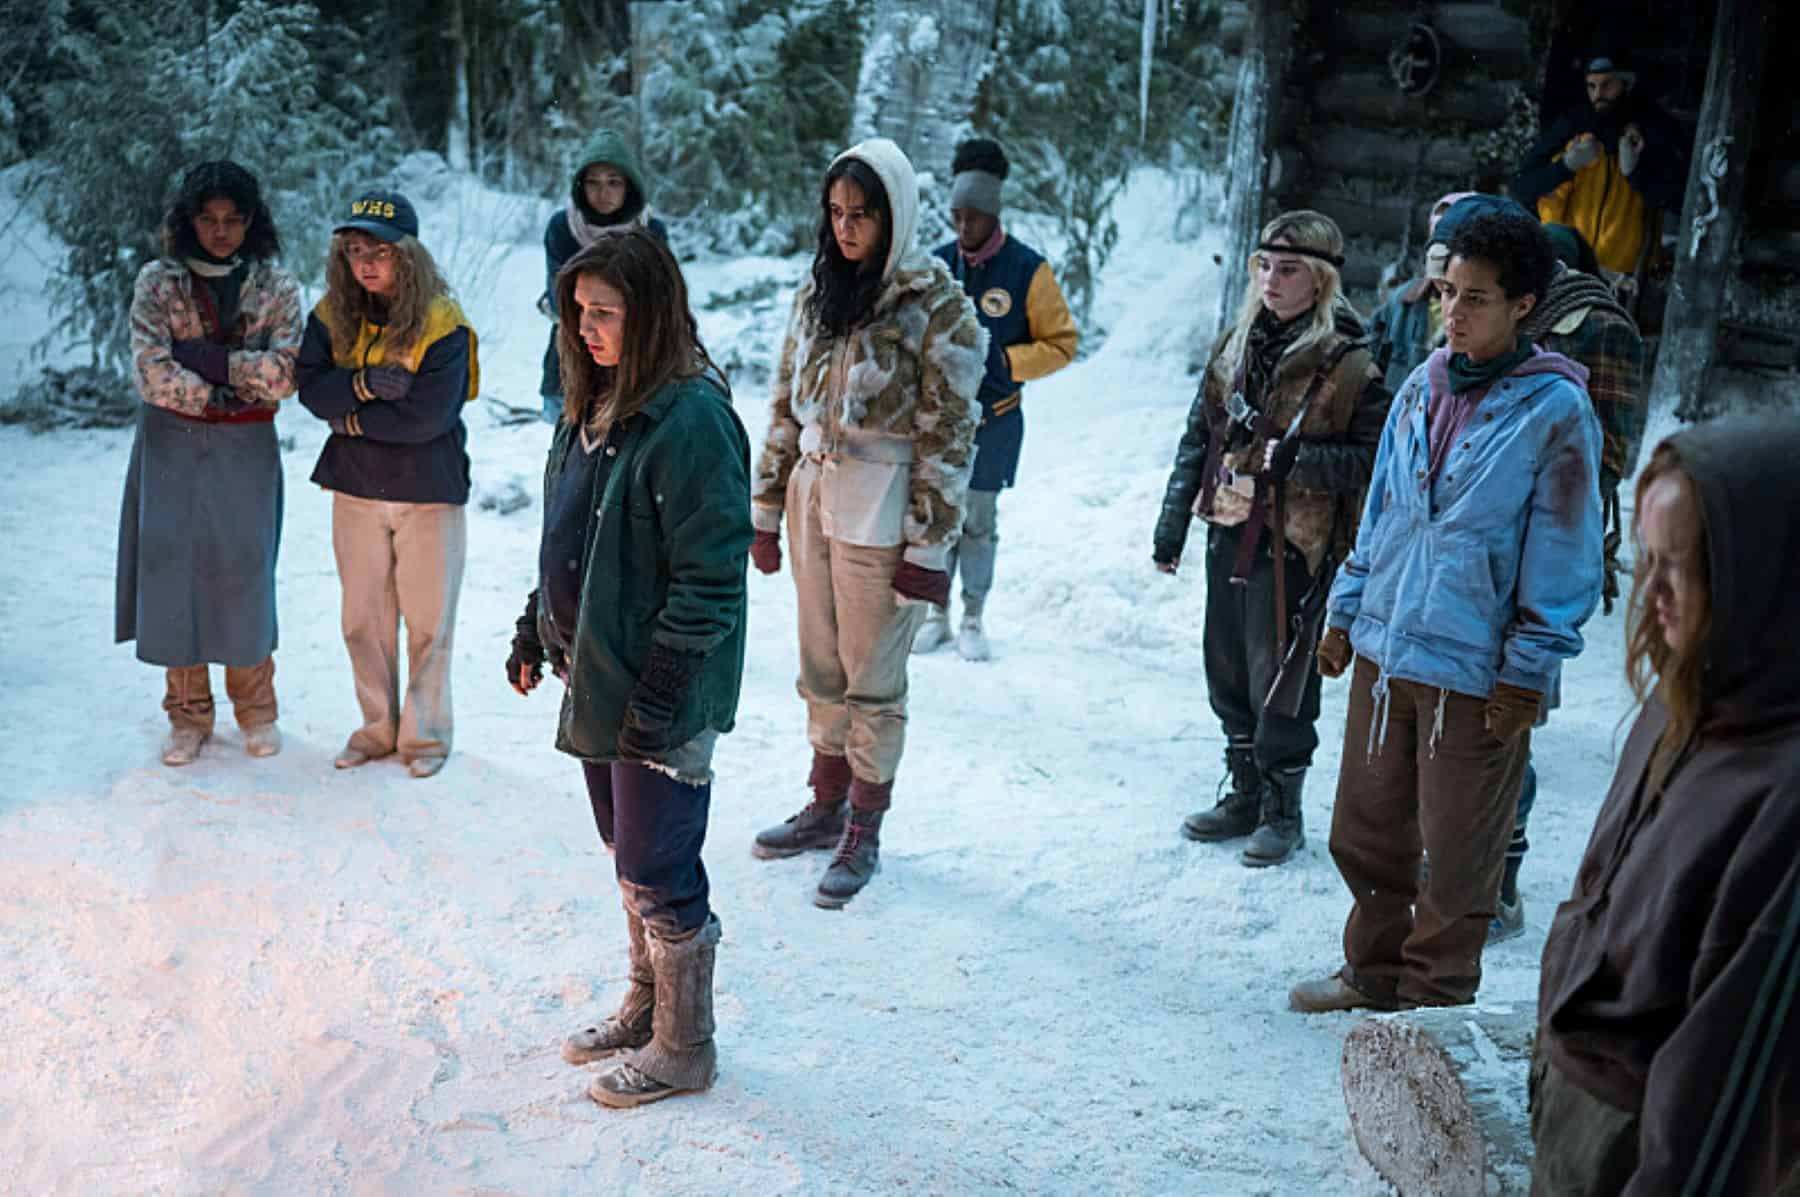 A group of teenagers standing outside in the snow look at something offscreen in this photo by Showtime.